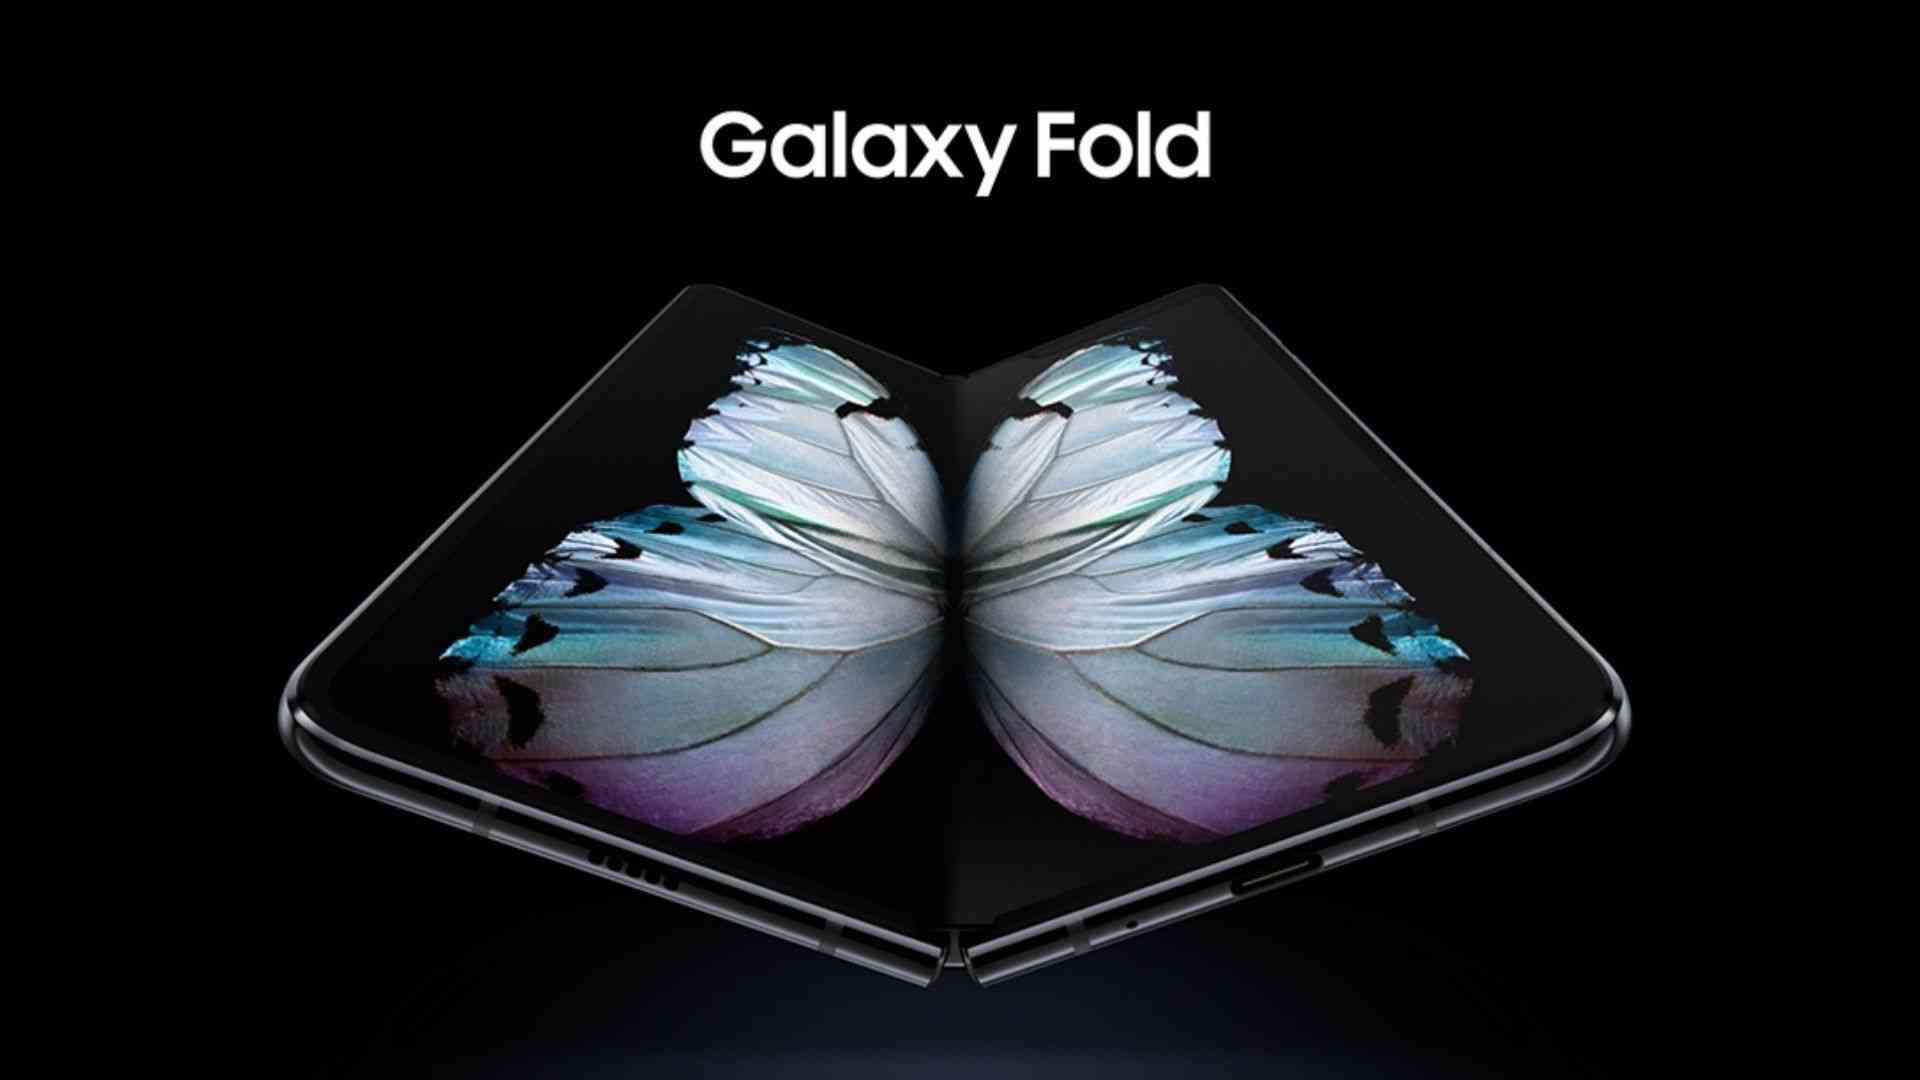 samsung galaxy folds launch delayed due to screen breaks 2272 big 1